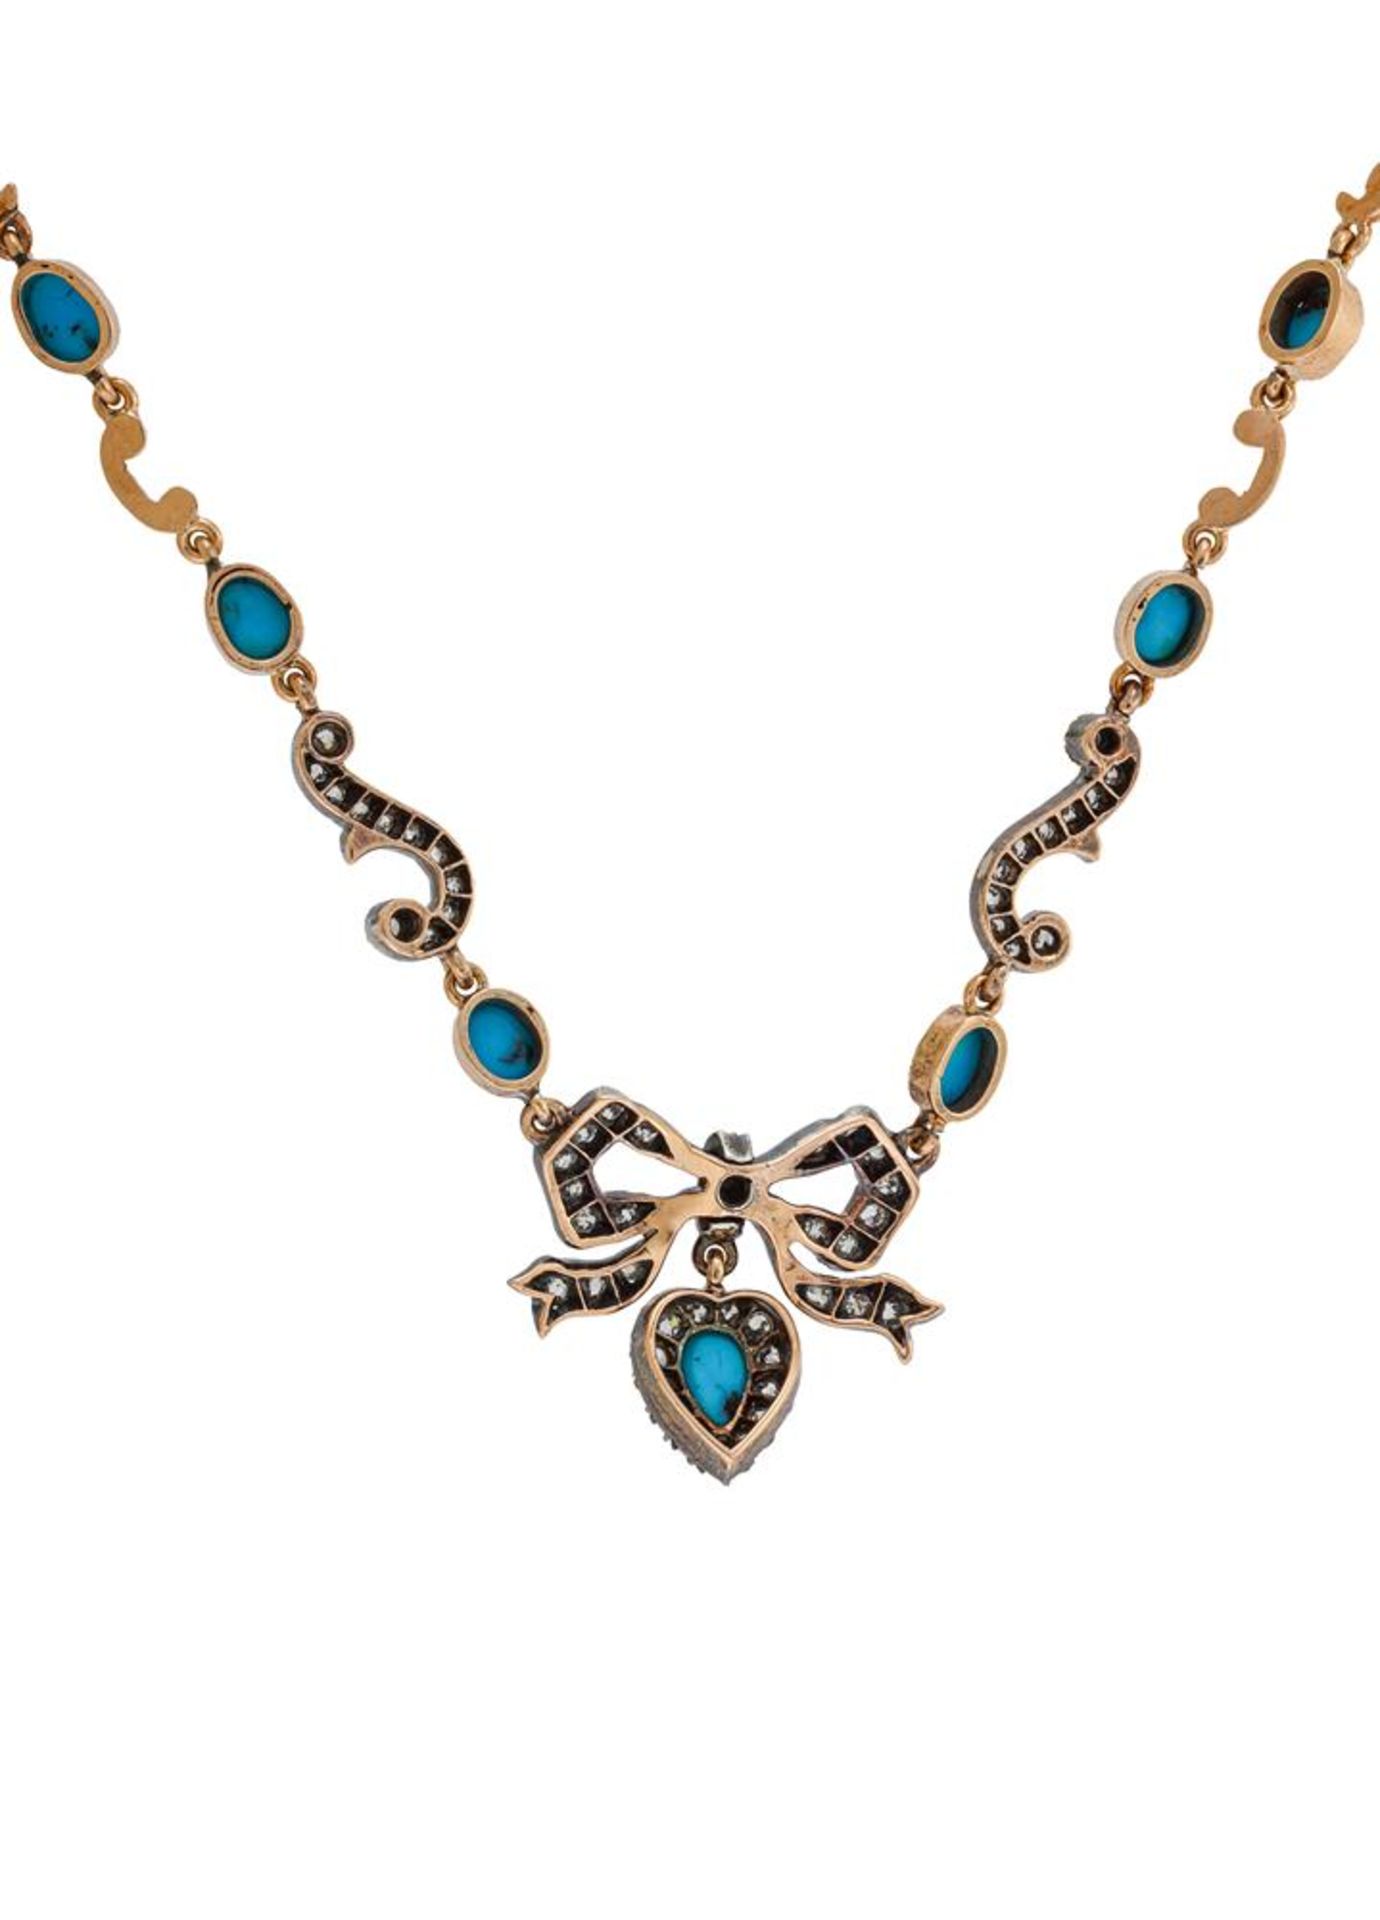 A TURQUOISE AND DIAMOND BOW NECKLACE - Image 3 of 3